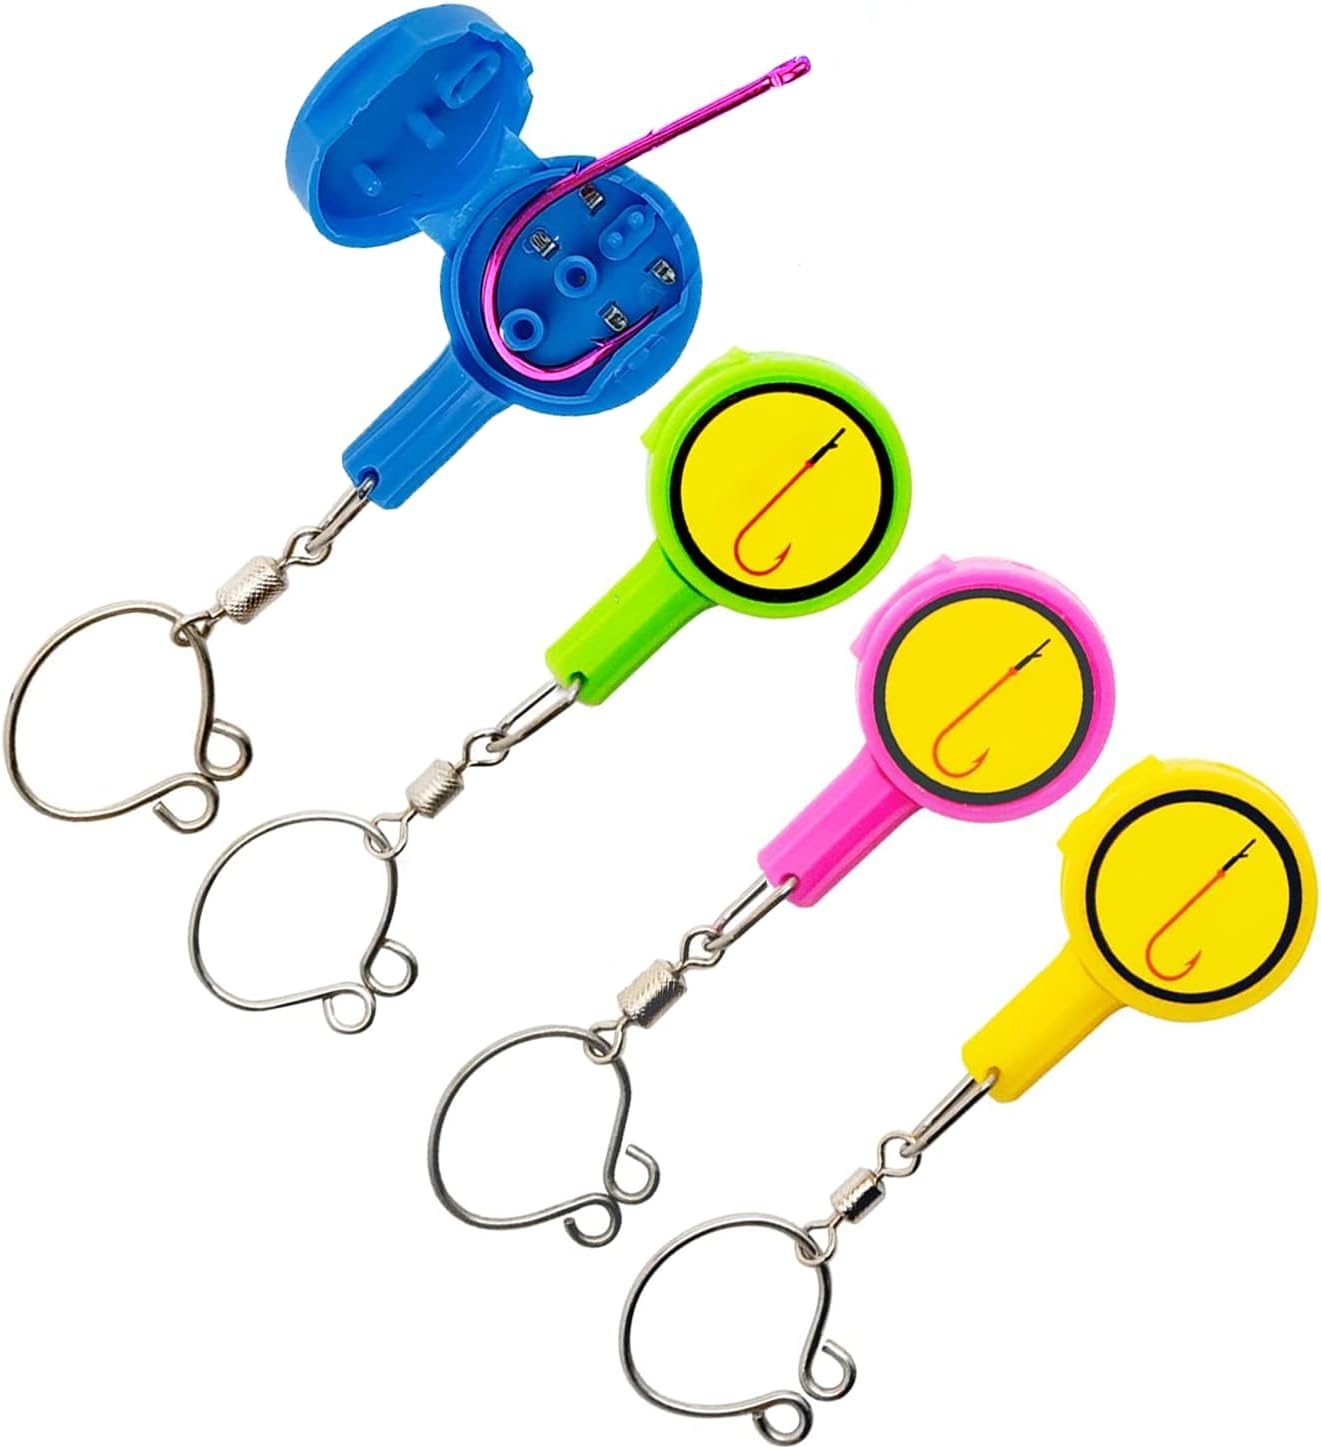 Tqonep Fishing Quick Knot Tying Tool 420 WholeSale - Price List